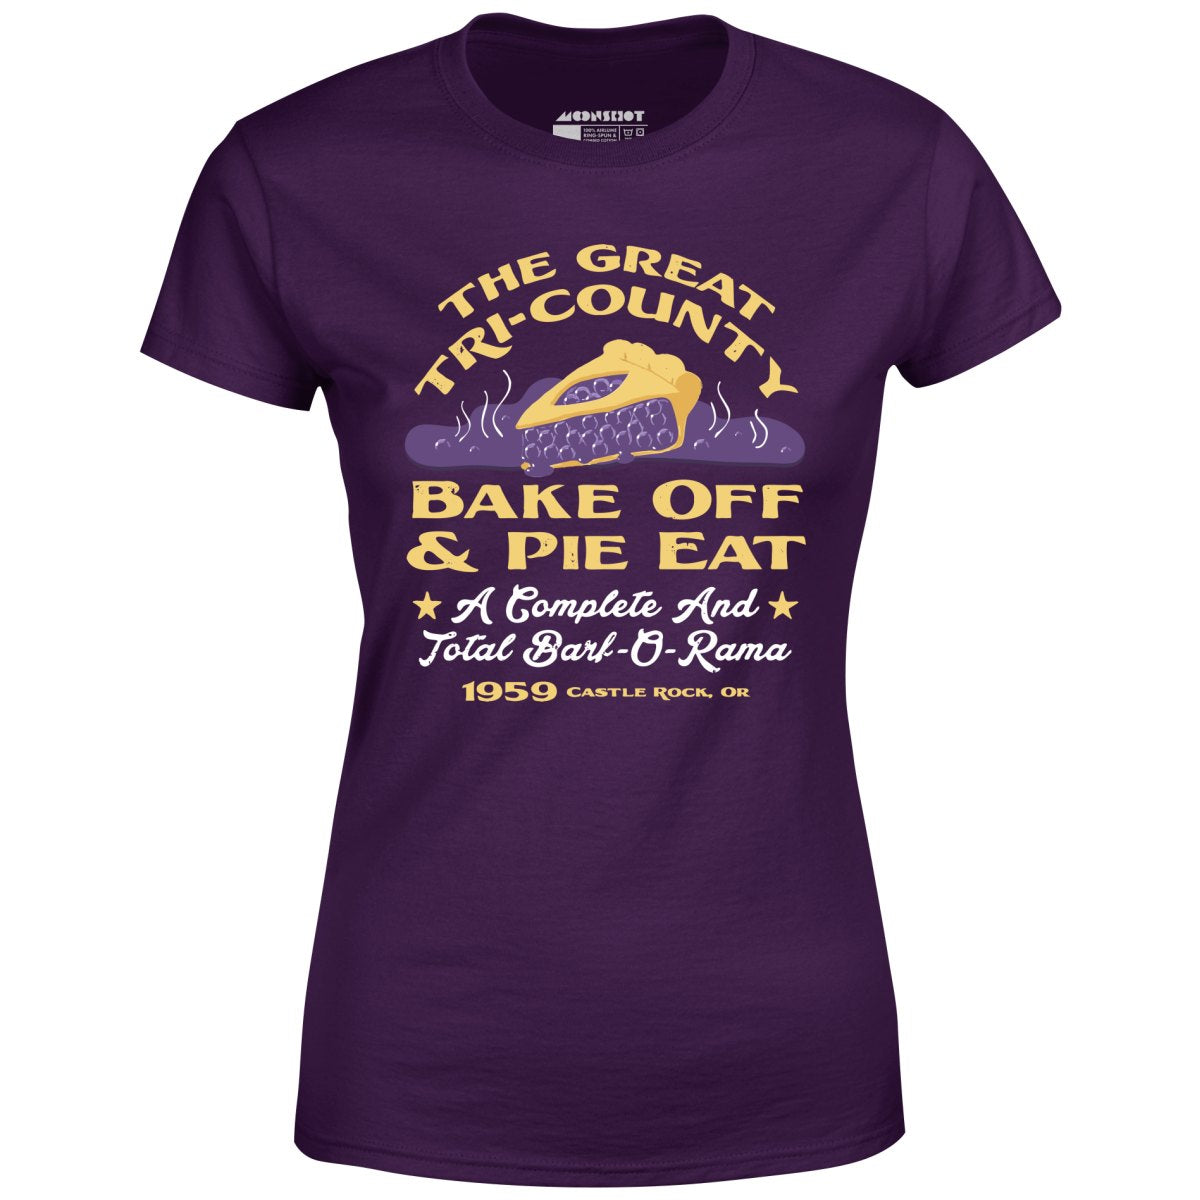 The Great Tri-County Bake Off & Pie Eat - Women's T-Shirt